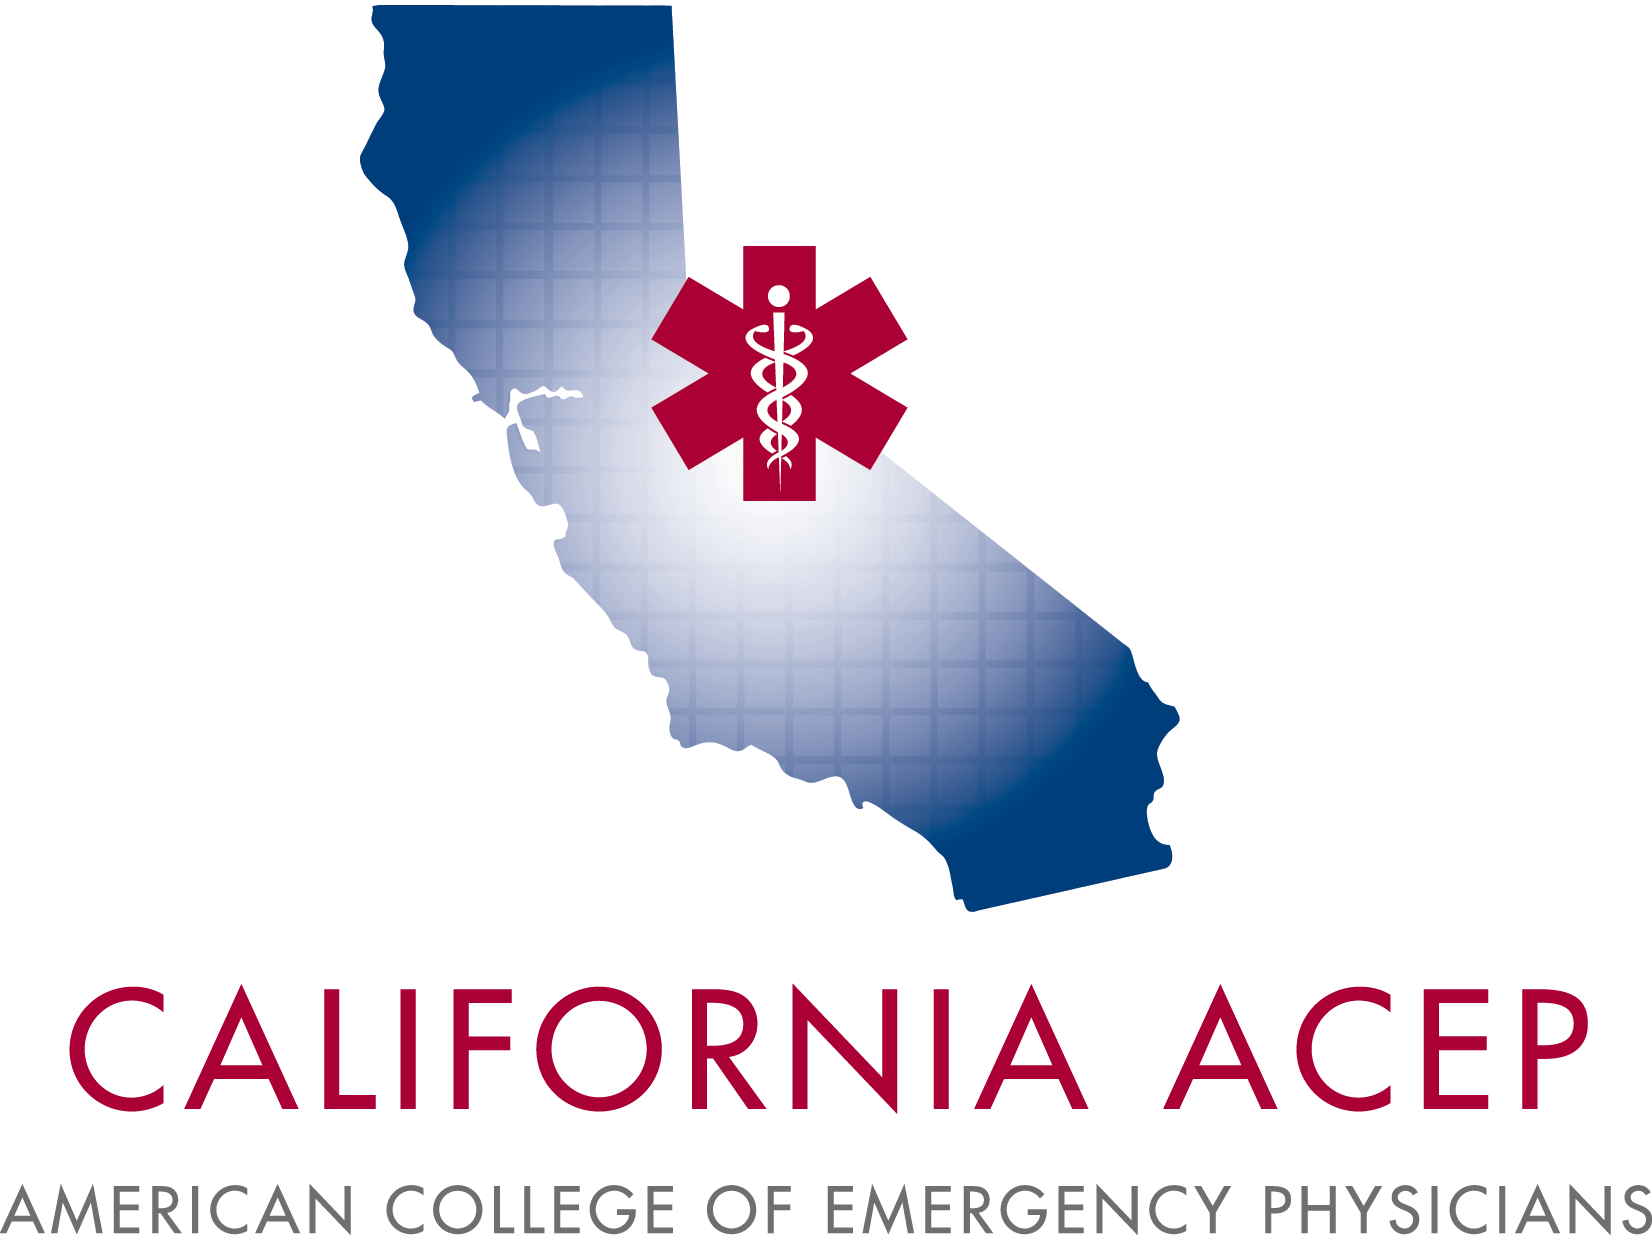 American College of Emergency Physicians, California chapter